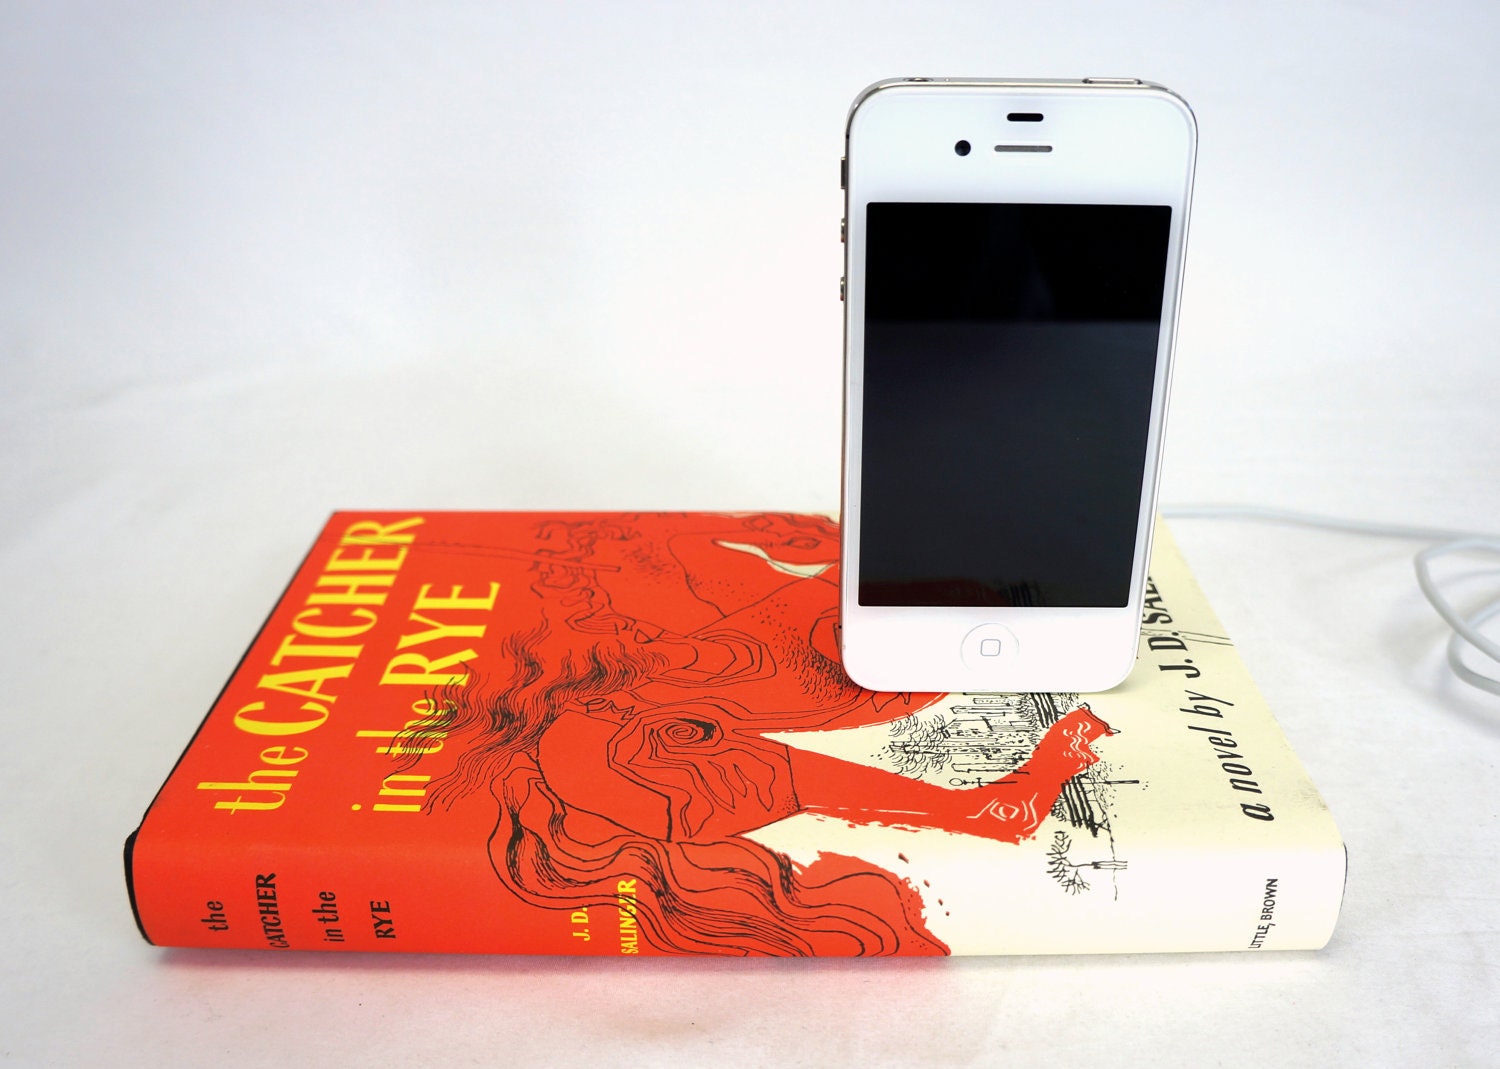 Catcher in the Rye booksi for iPhone and iPod - J.D. Salinger